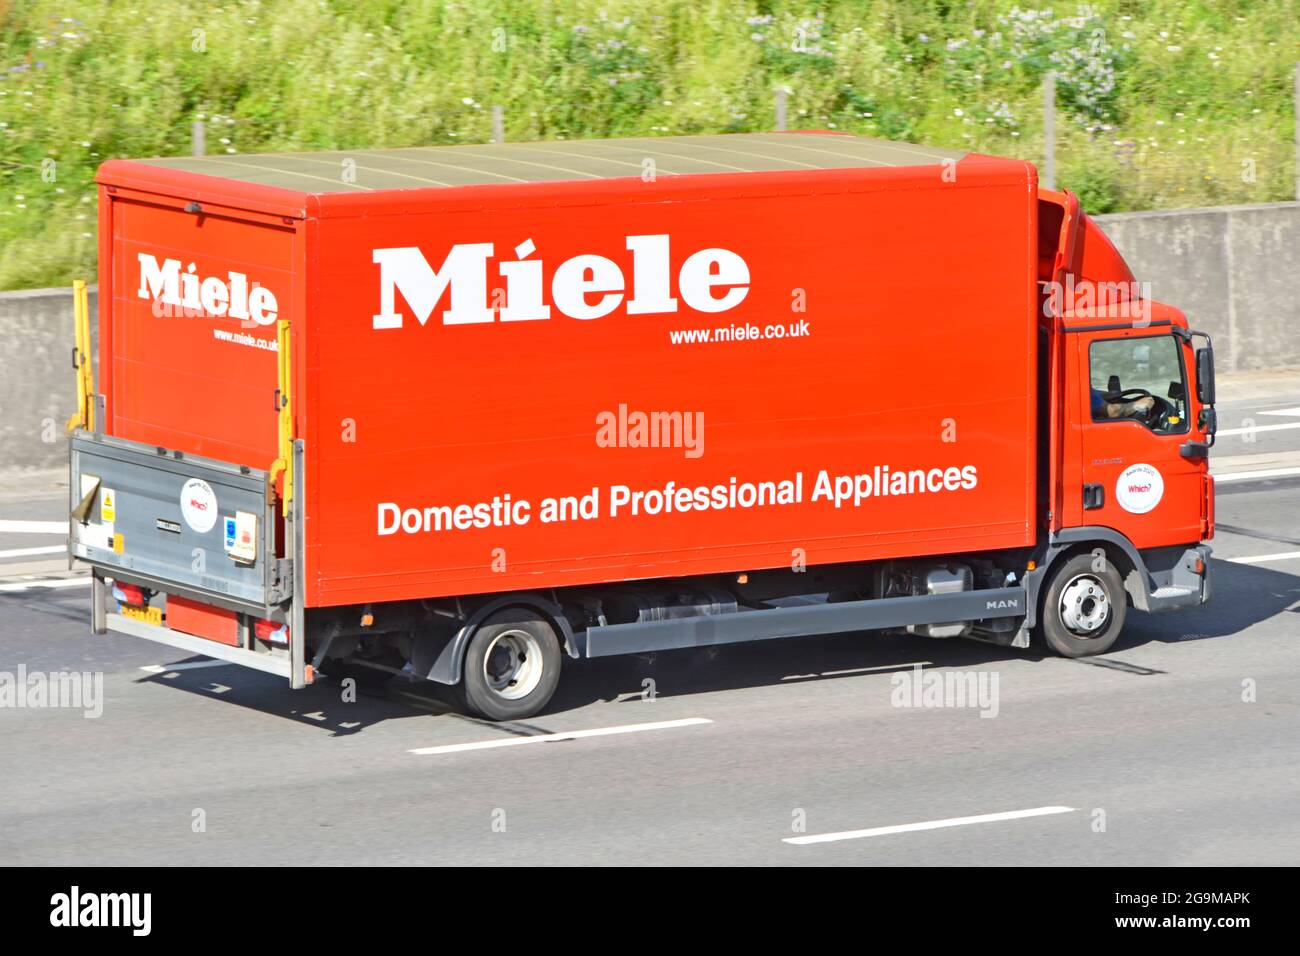 Back tailgate view of Miele business brand advertising for Domestic & Professional electrical appliances on side of lorry truck driving on UK motorway Stock Photo